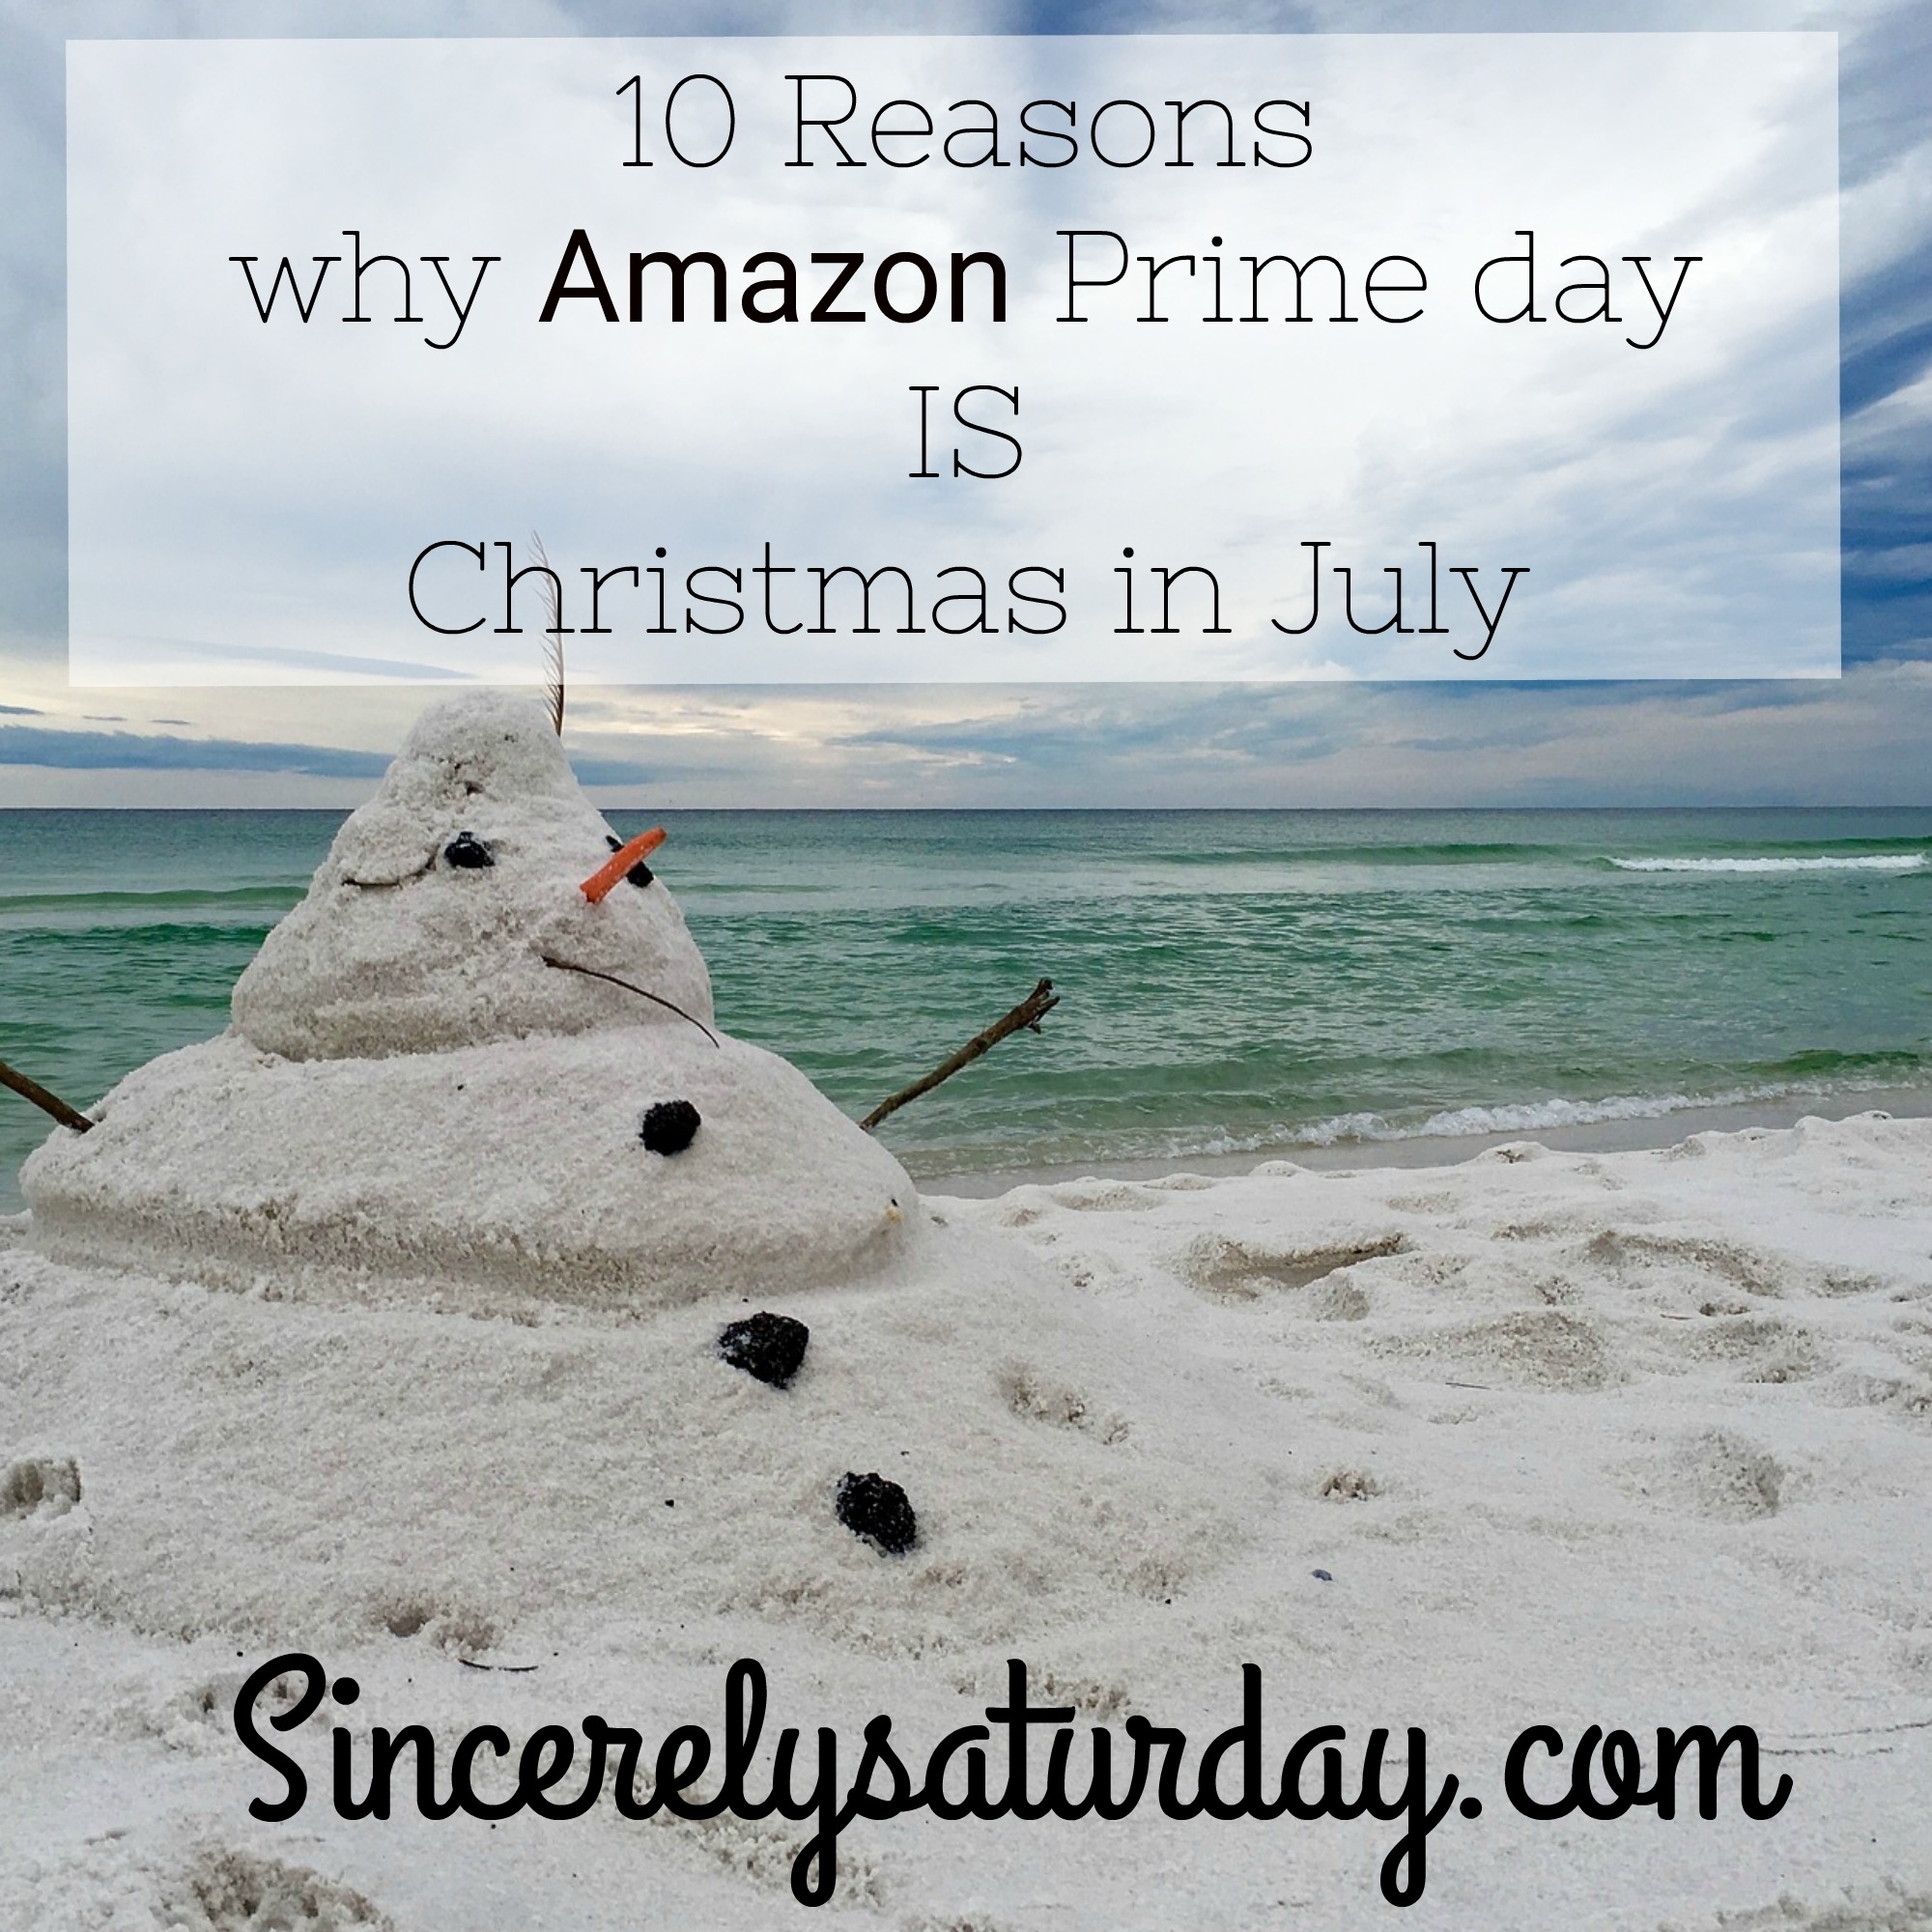 10 Reasons why Amazon Prime day IS Christmas in July